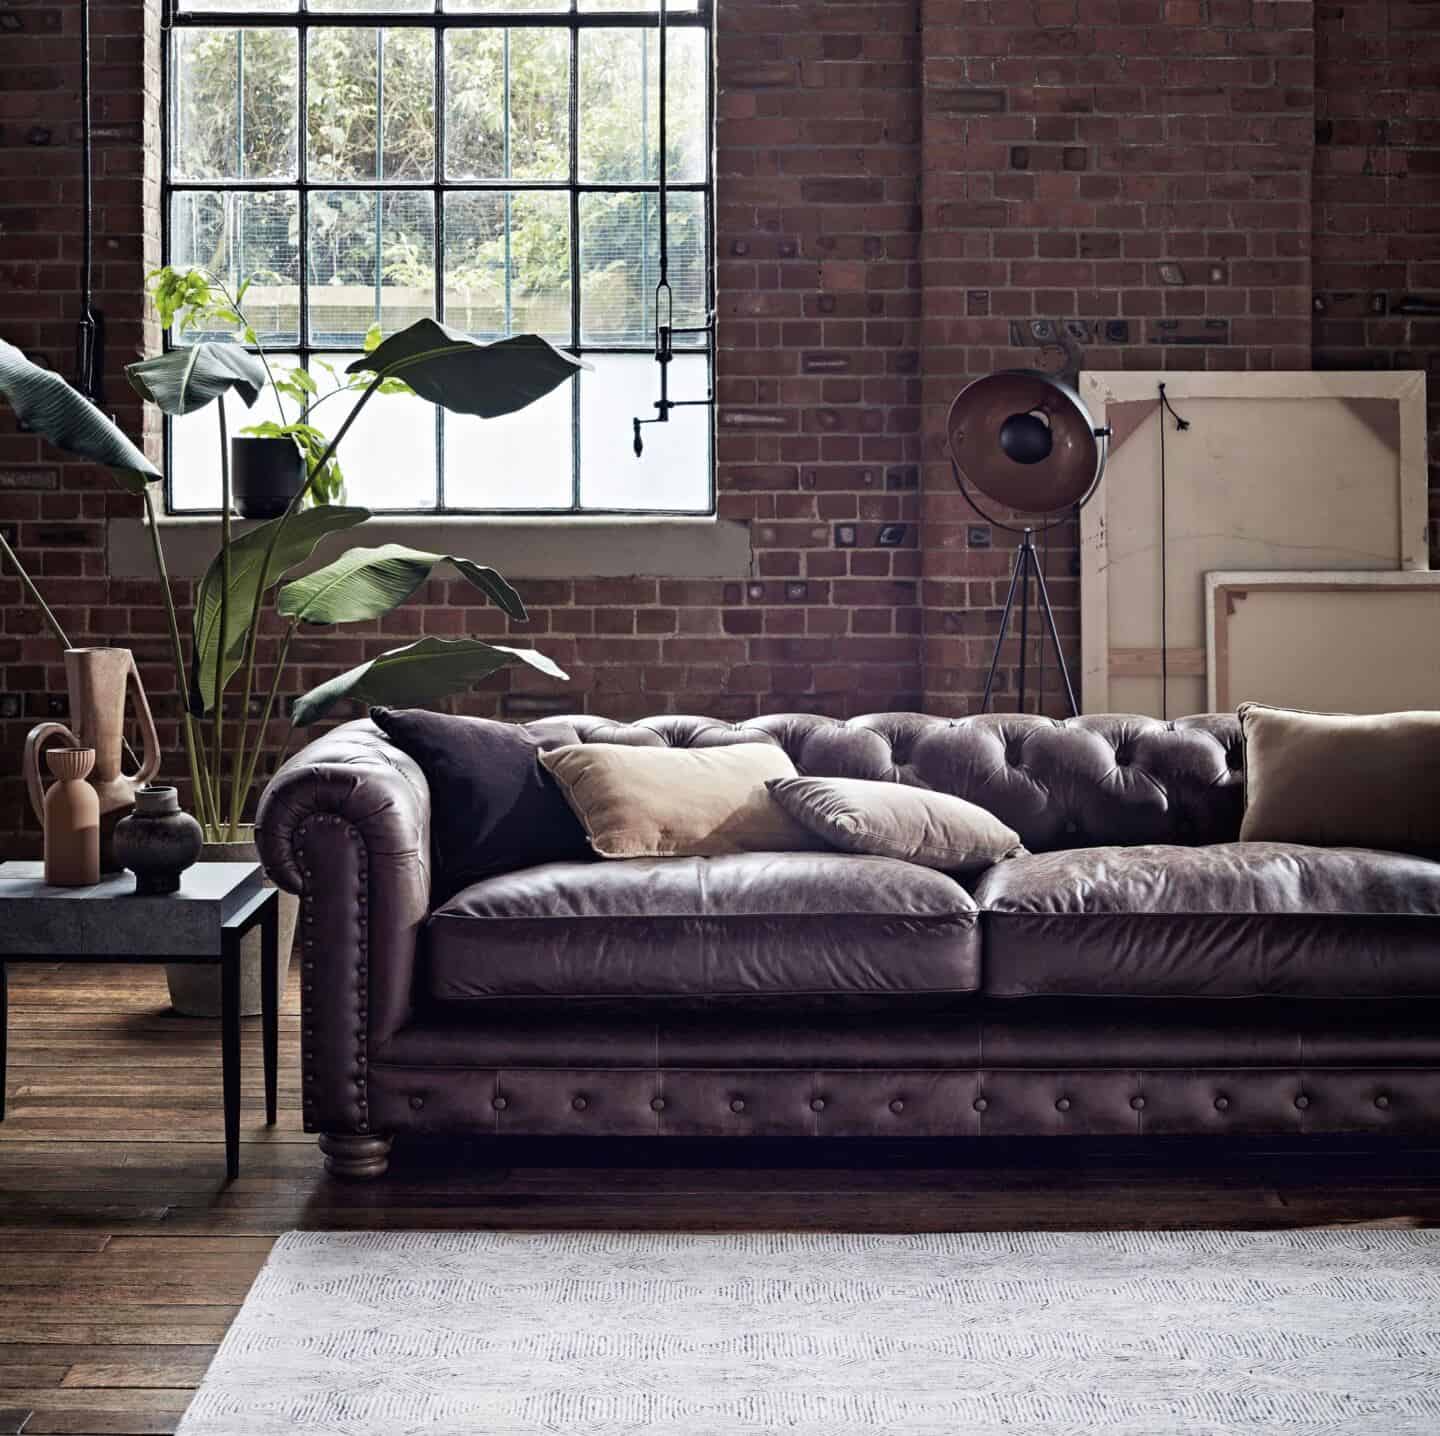 Chesterfield sofa style in an industrial loft style living room